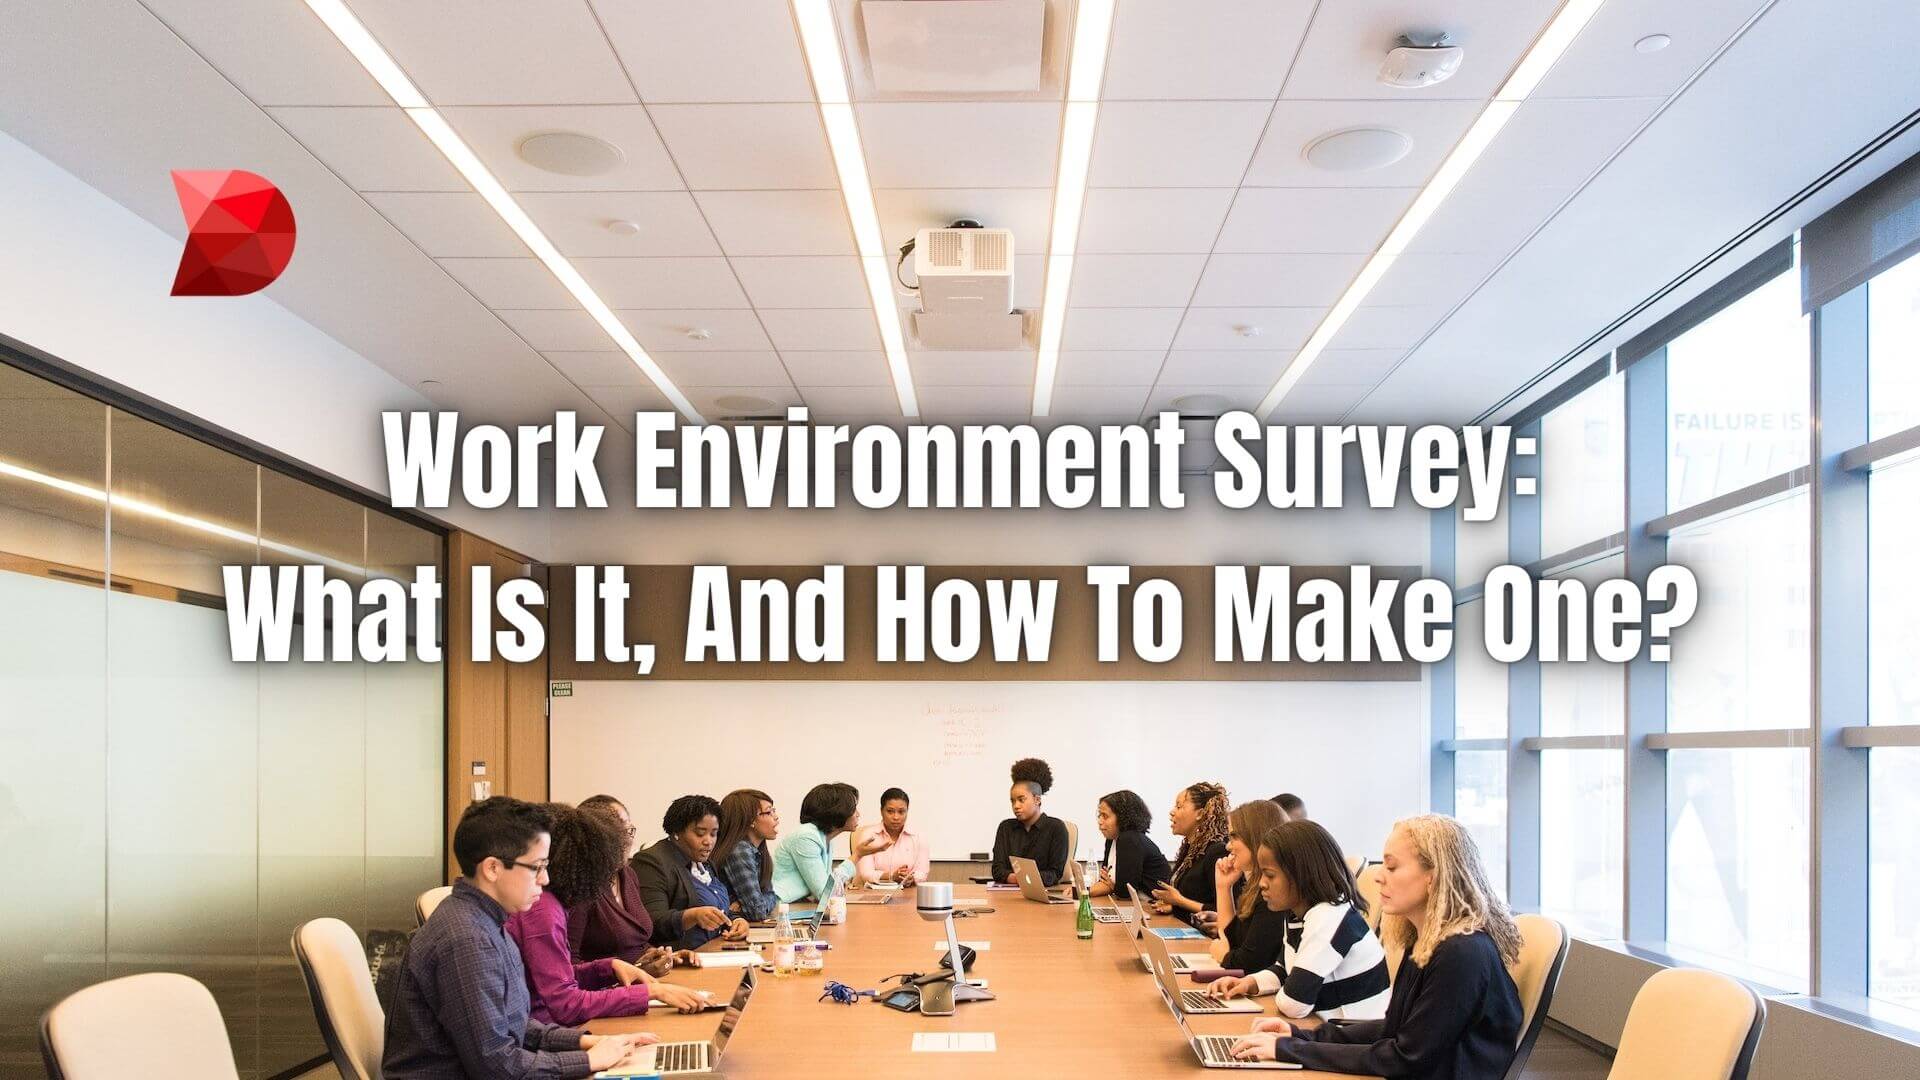 A work environment survey provides insights into the employees' job responsibilities and working conditions. Here's how to create one.